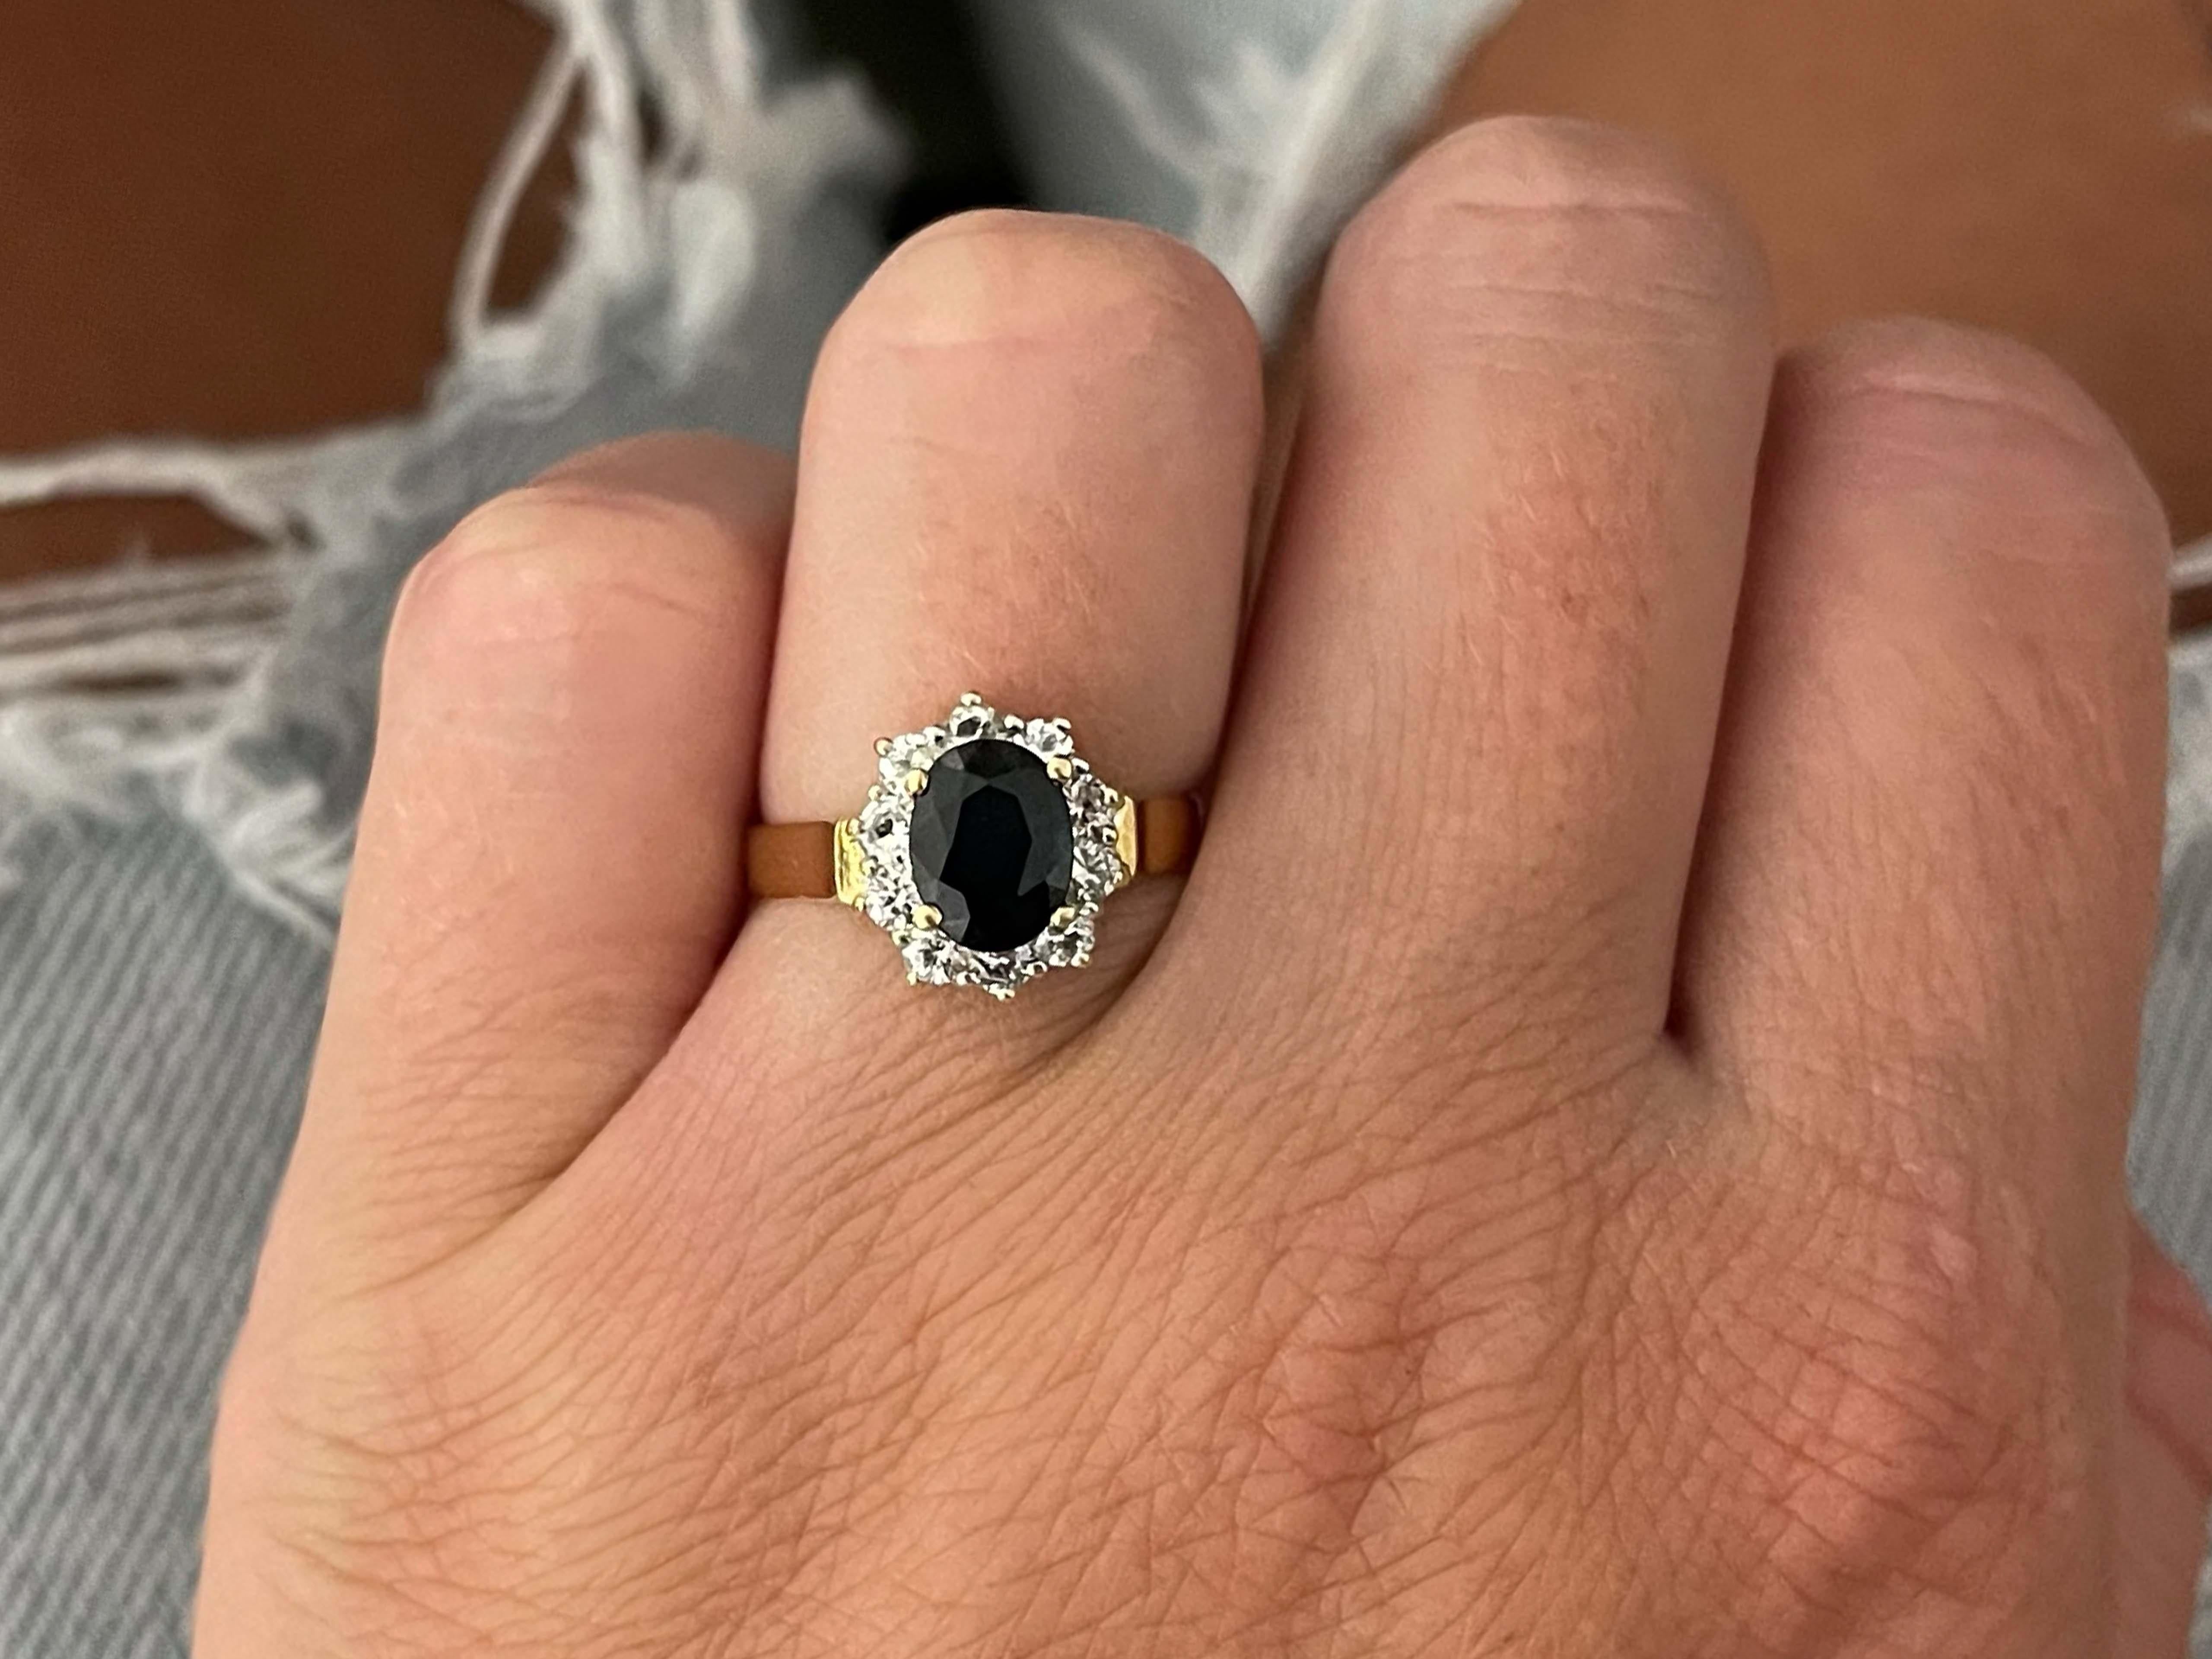 Item Specifications:

Metal: 18K Yellow Gold

Style: Statement Ring

Ring Size: 6.75 (resizing available for a fee)

Total Weight: 4.1 Grams
​
​Diamond Count: 10

Diamond Carat Weight: 0.50

Diamond Color: G

Diamond Clarity: VS

Gemstone